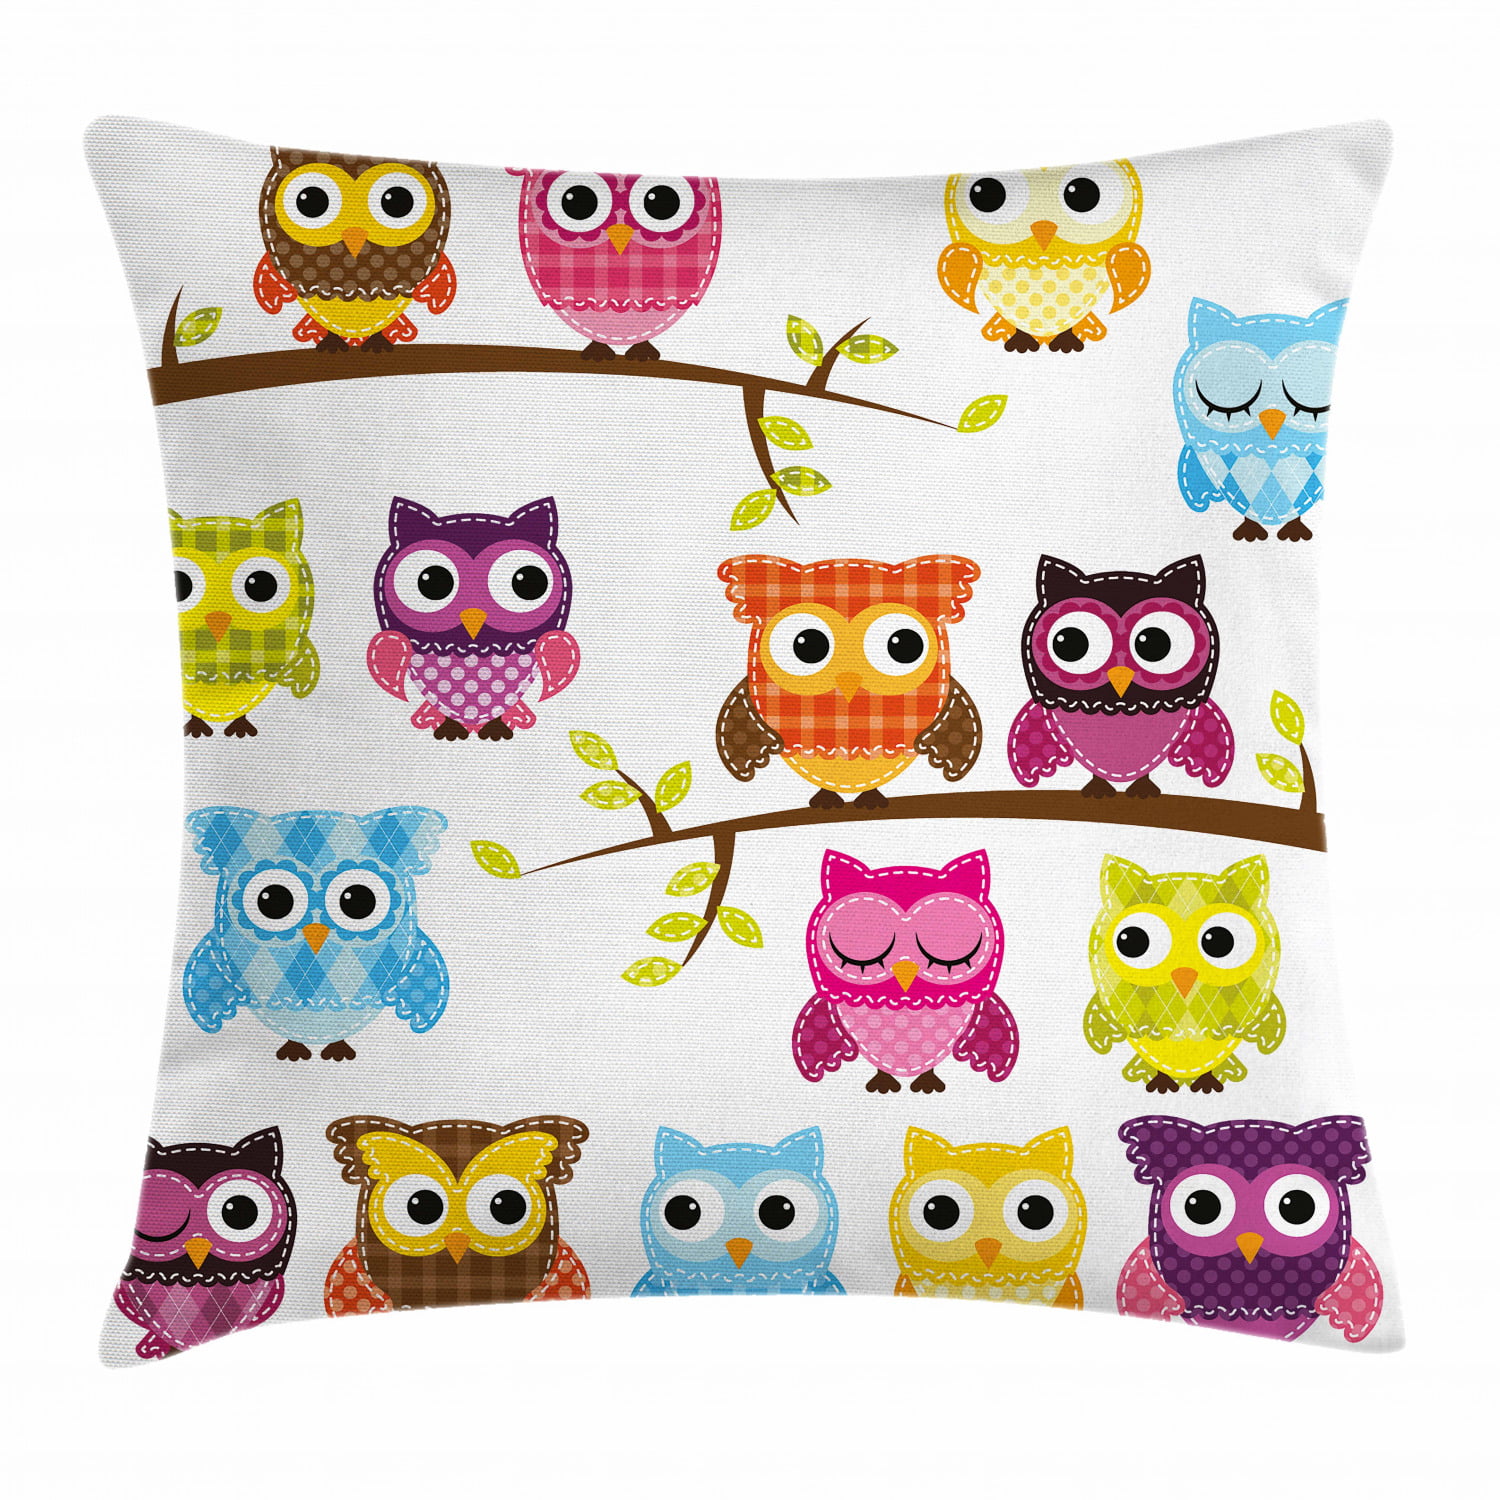 Owl Cushion Cover 16 inch 40cm Cute Owl Wildlife Sitting in Autumn Leaves White